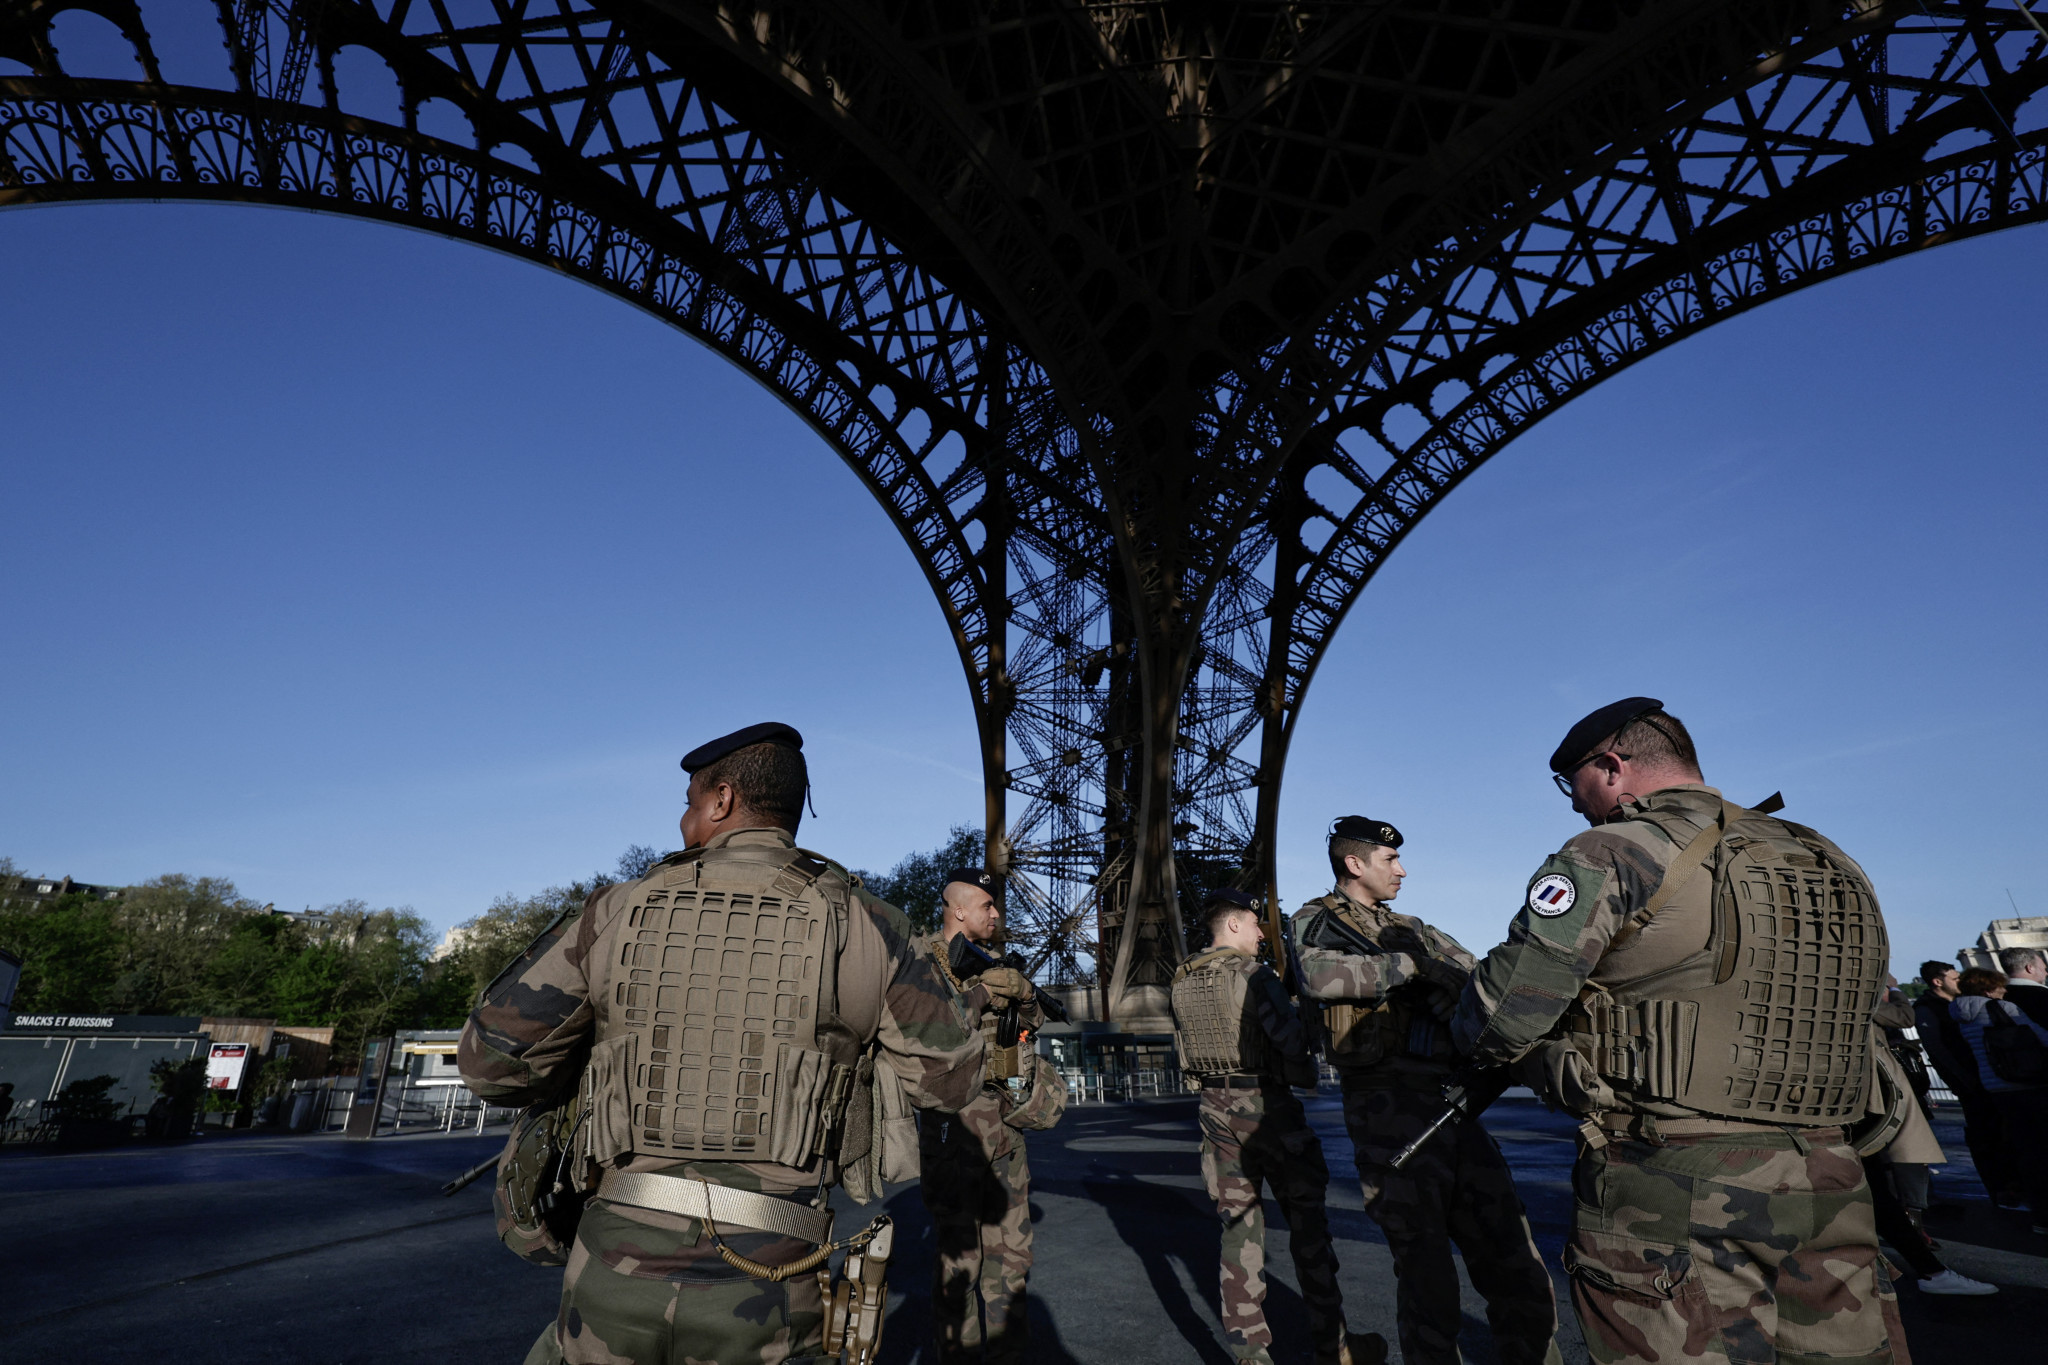 There is a staggering security presence across Paris in the wake of the Olympic Games. GETTY IMAGES